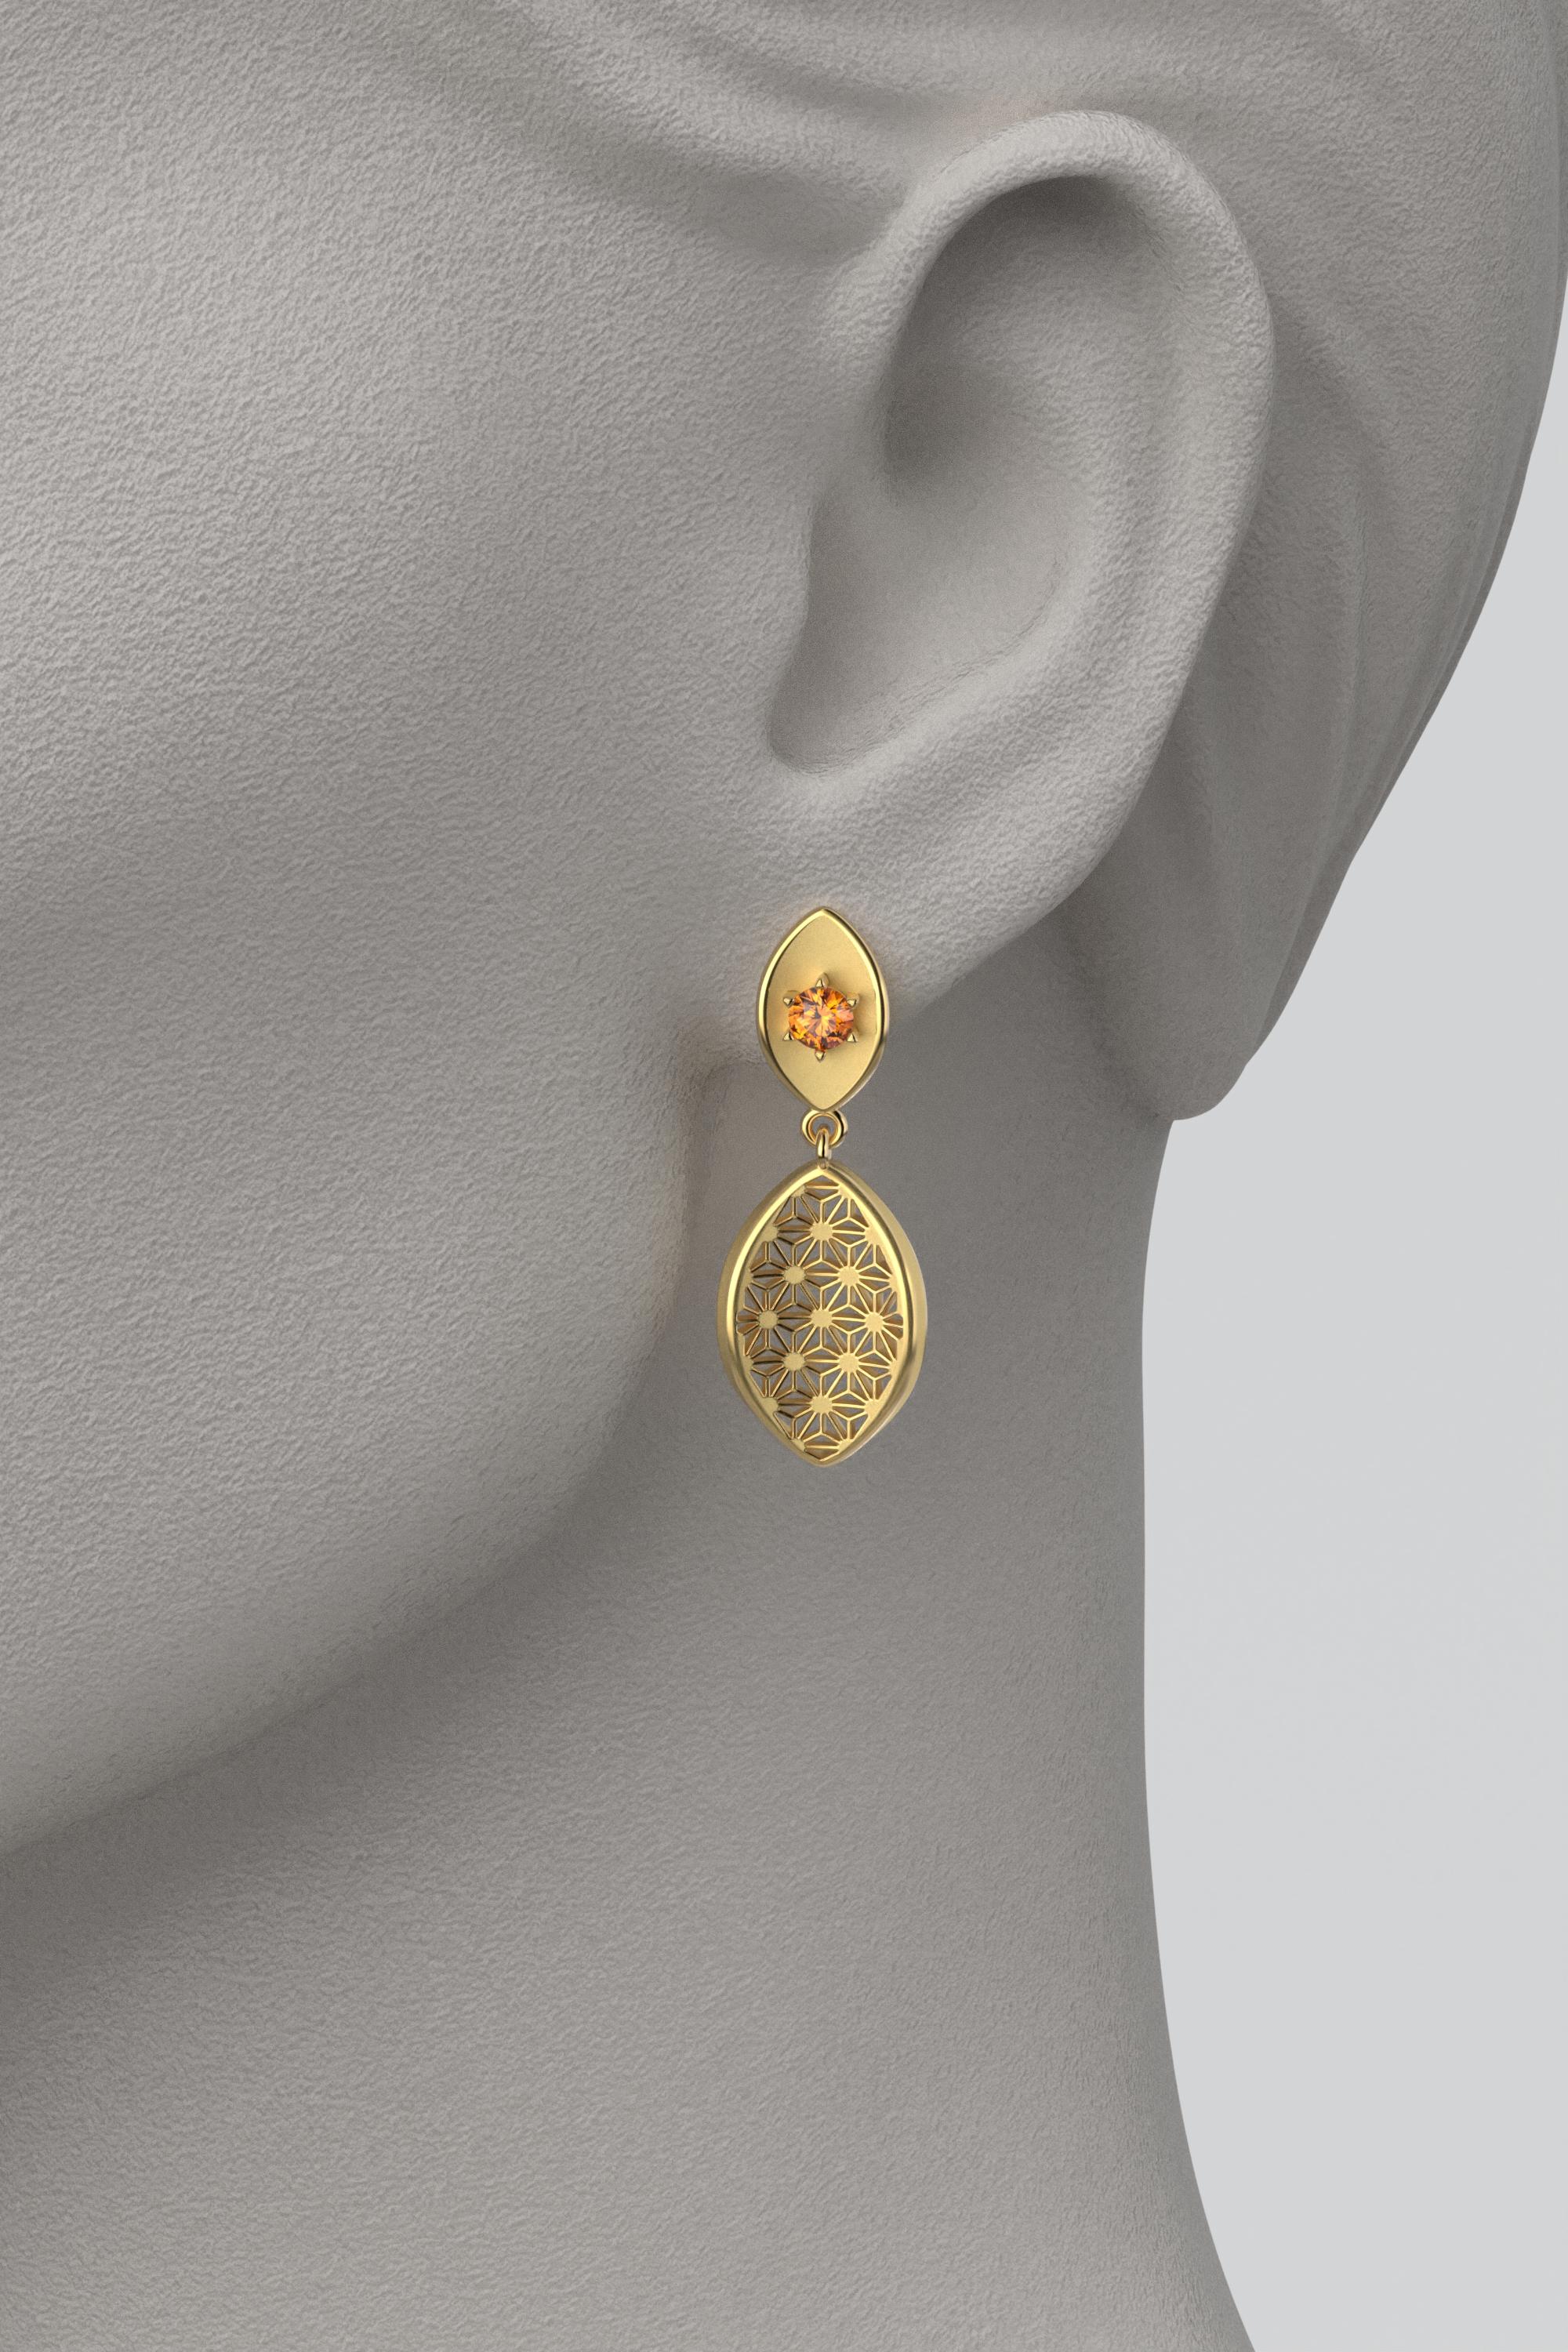  Oltremare Gioielli 14k Gold Hessonite Garnet Earrings made in Italy In New Condition For Sale In Camisano Vicentino, VI